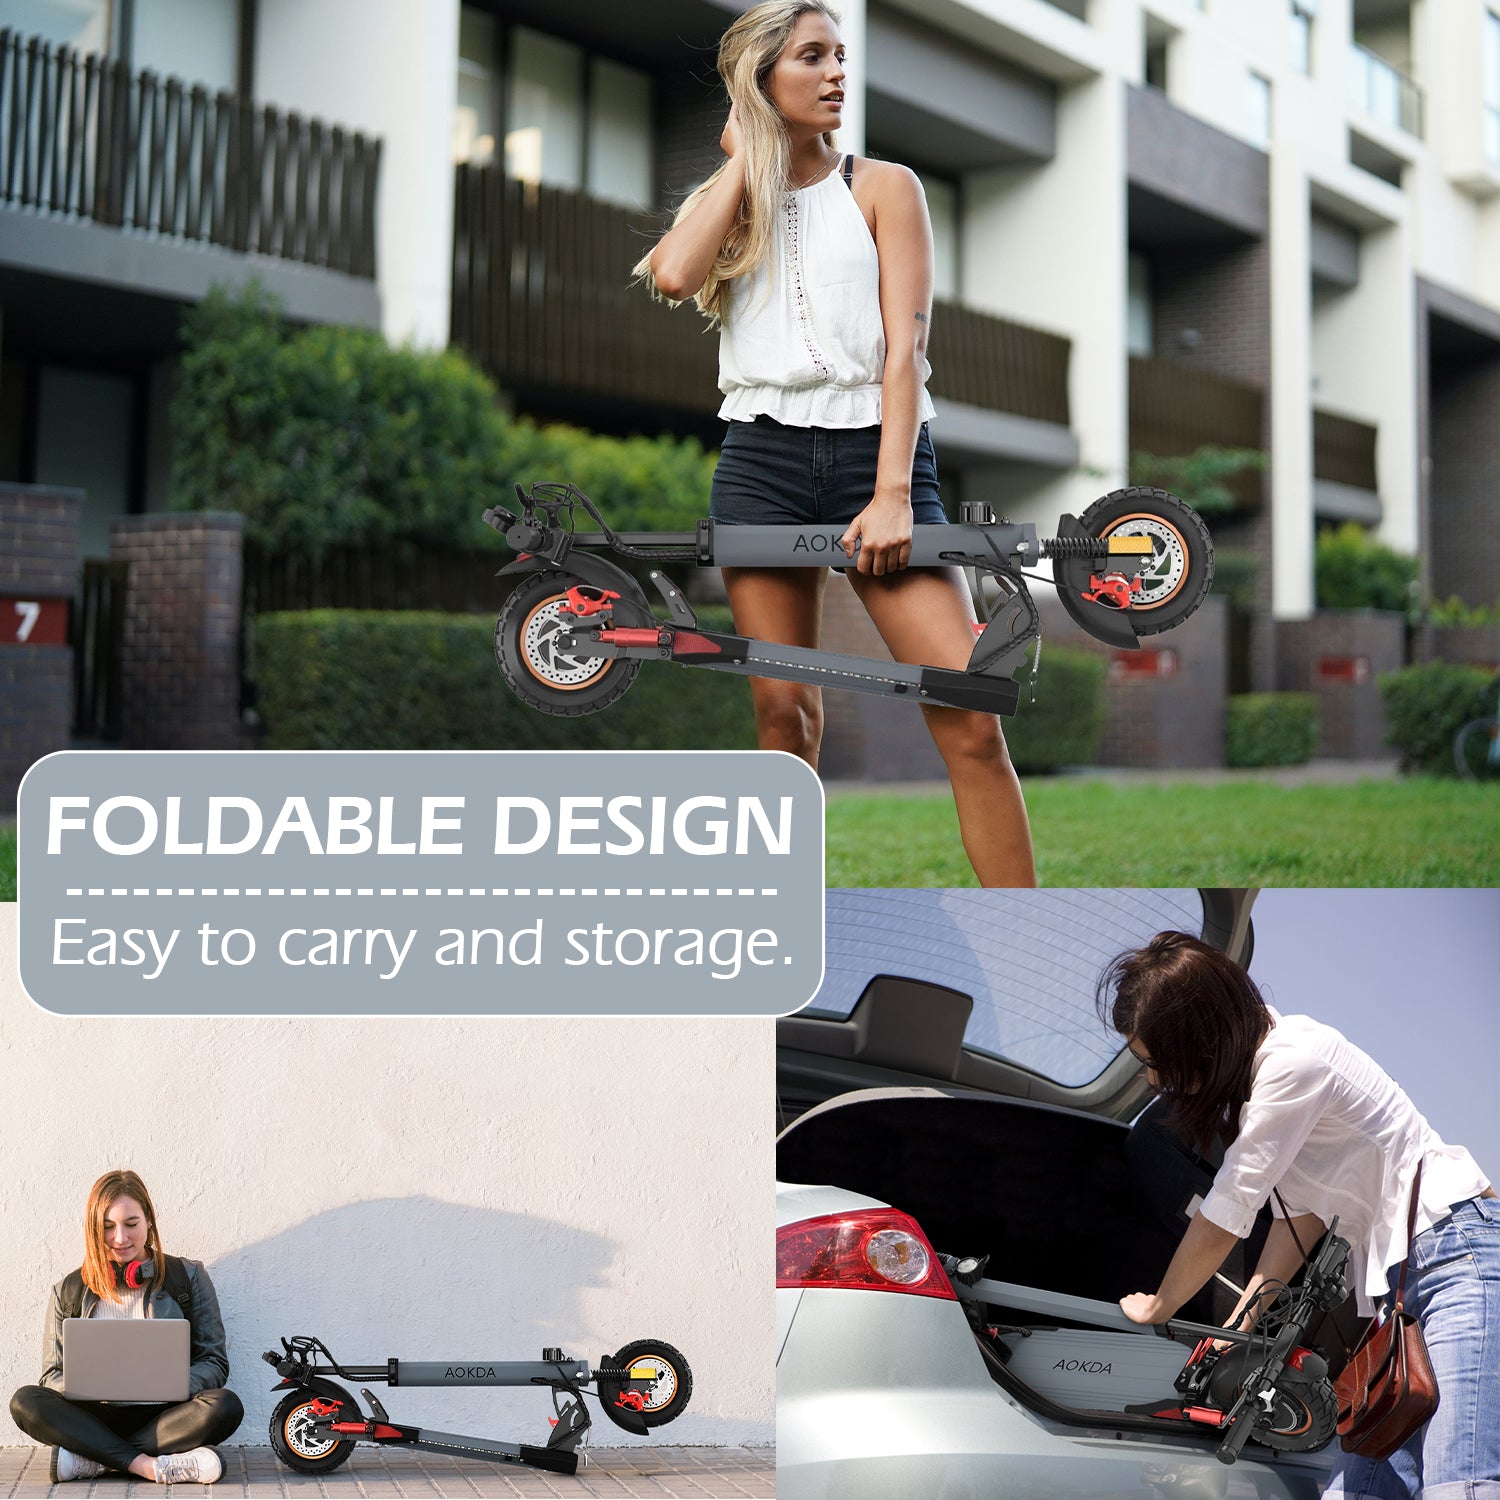 AOKDA A1 Commuting electric scooter fast folding design.